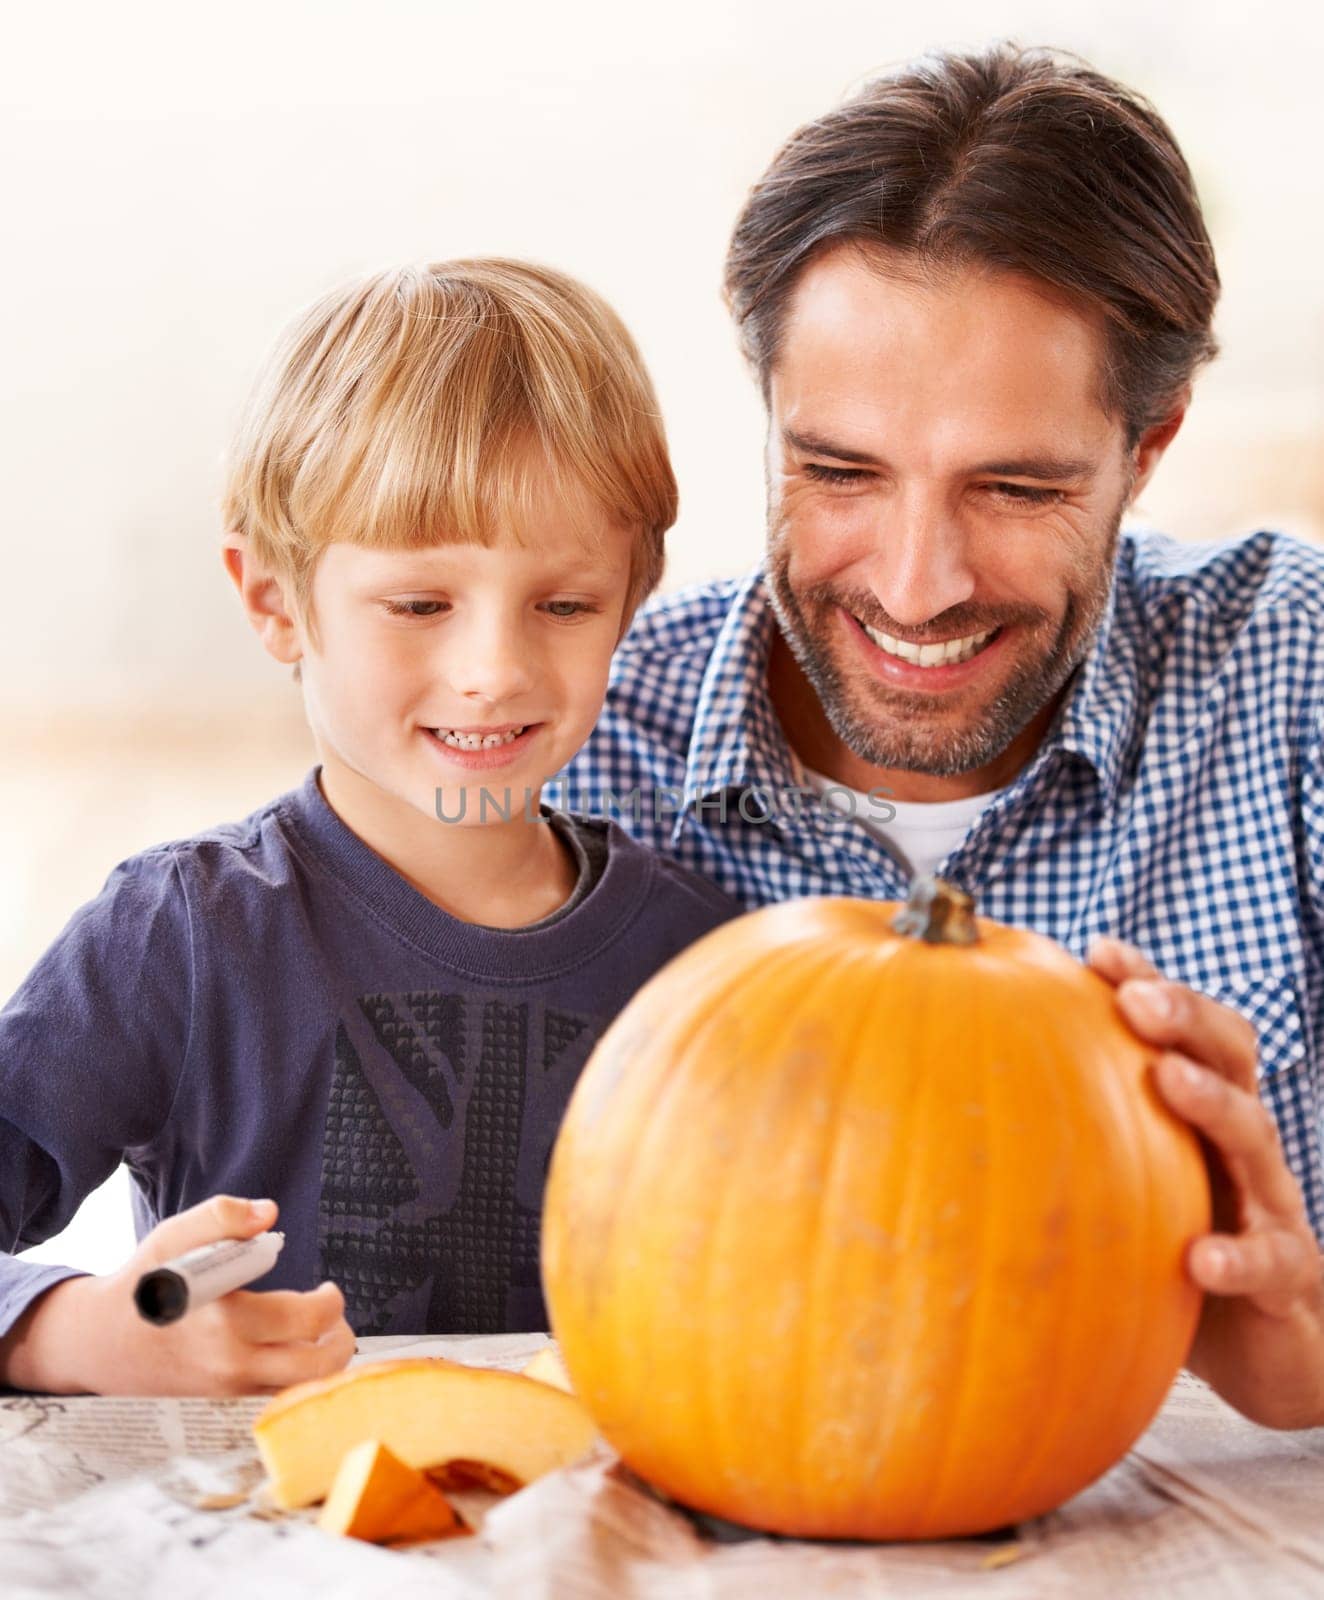 Child, father and smile for drawing on pumpkin, craft and celebrate halloween party at home. Happy boy kid, dad and family writing with pen marker on vegetable, holiday lantern or creative decoration.